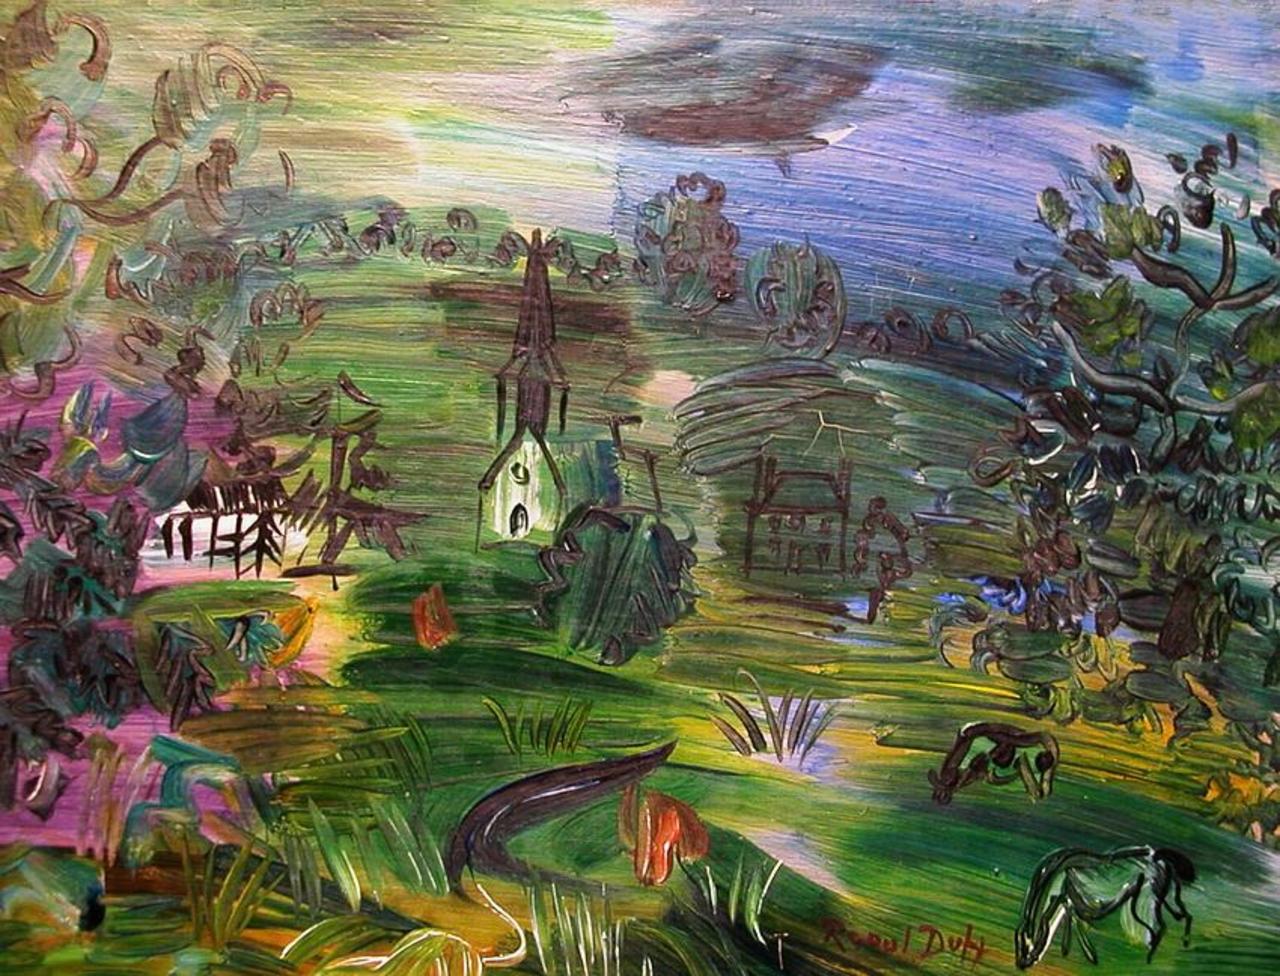 “@MatthewsGallery: Raoul Dufy, Landscape with Houses and Animals. #fauvism #arthistory http://t.co/X0a2CmxdKv”@janeadamswatts